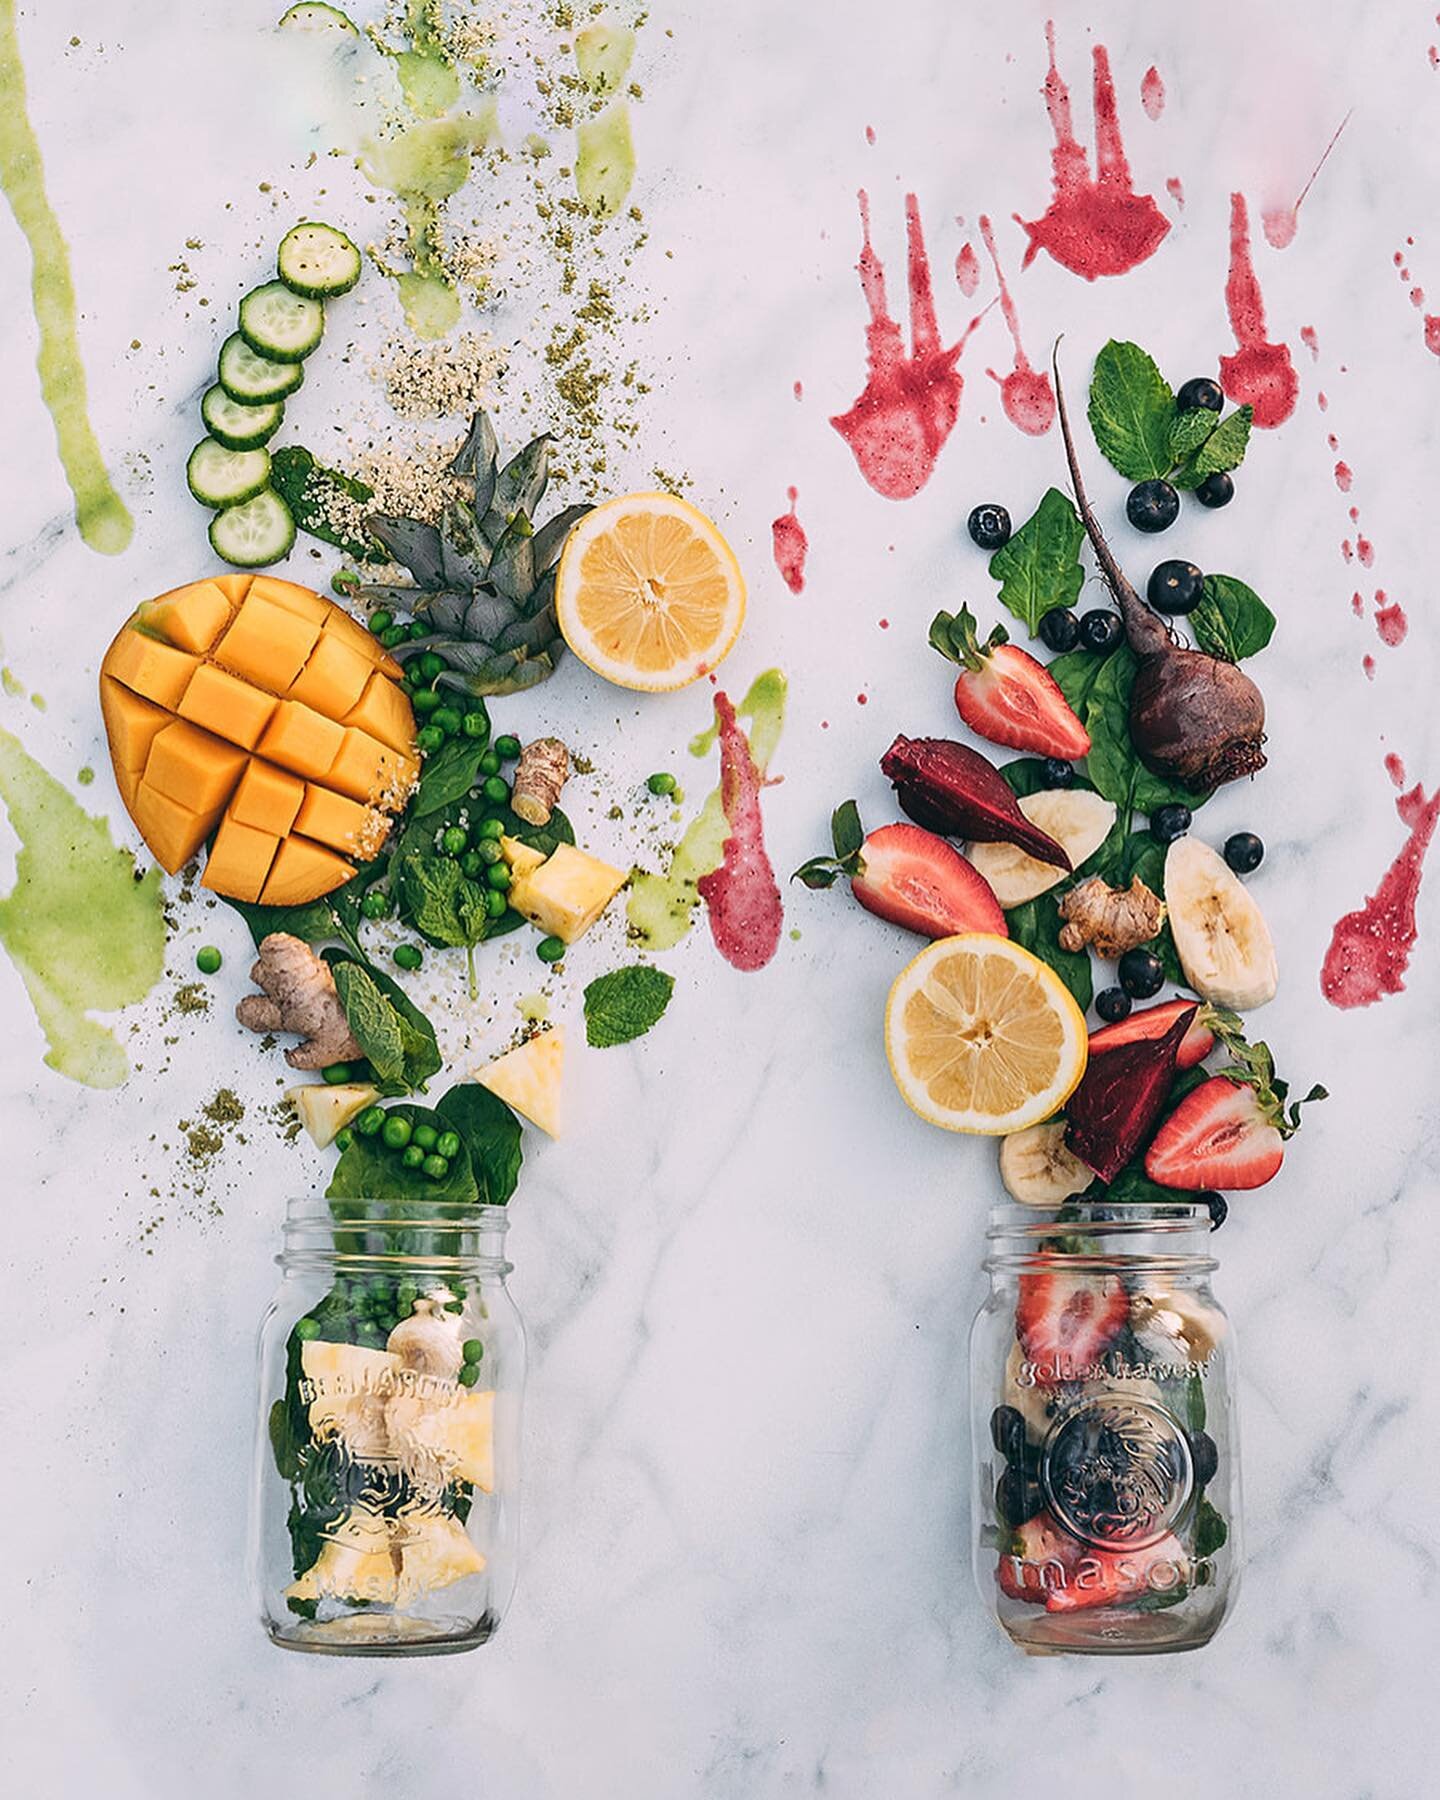 Are you looking for a simple and healthy way to get more nutrients into your diet? Smoothies are a great, quick way to load up on the fruits &amp; veggies that you may be missing. Not only are they packed with vitamins and minerals, but they can also